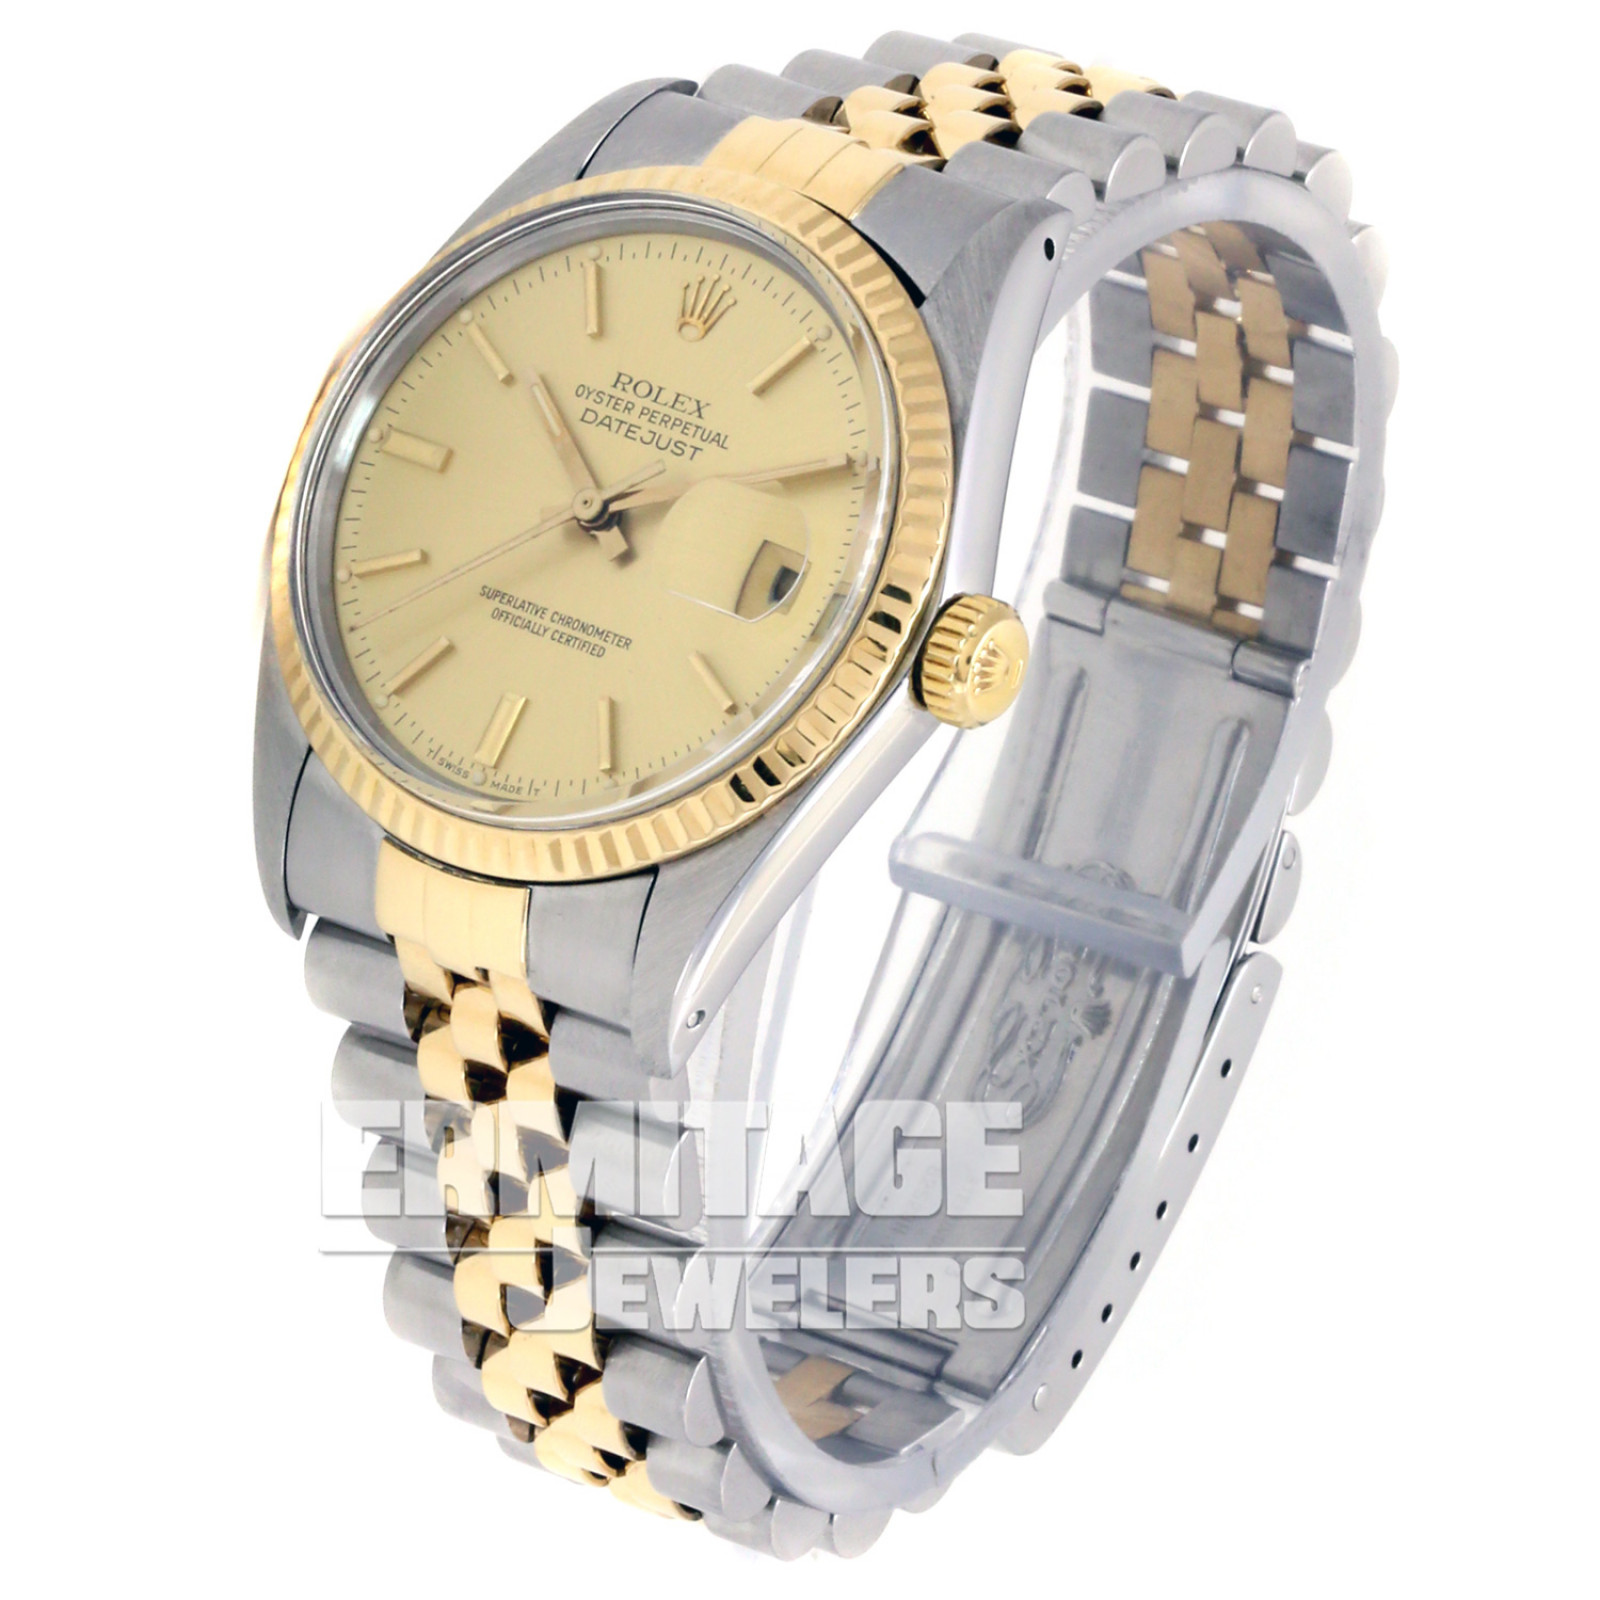 Classic Rolex Datejust 16013 with Champagne Dial